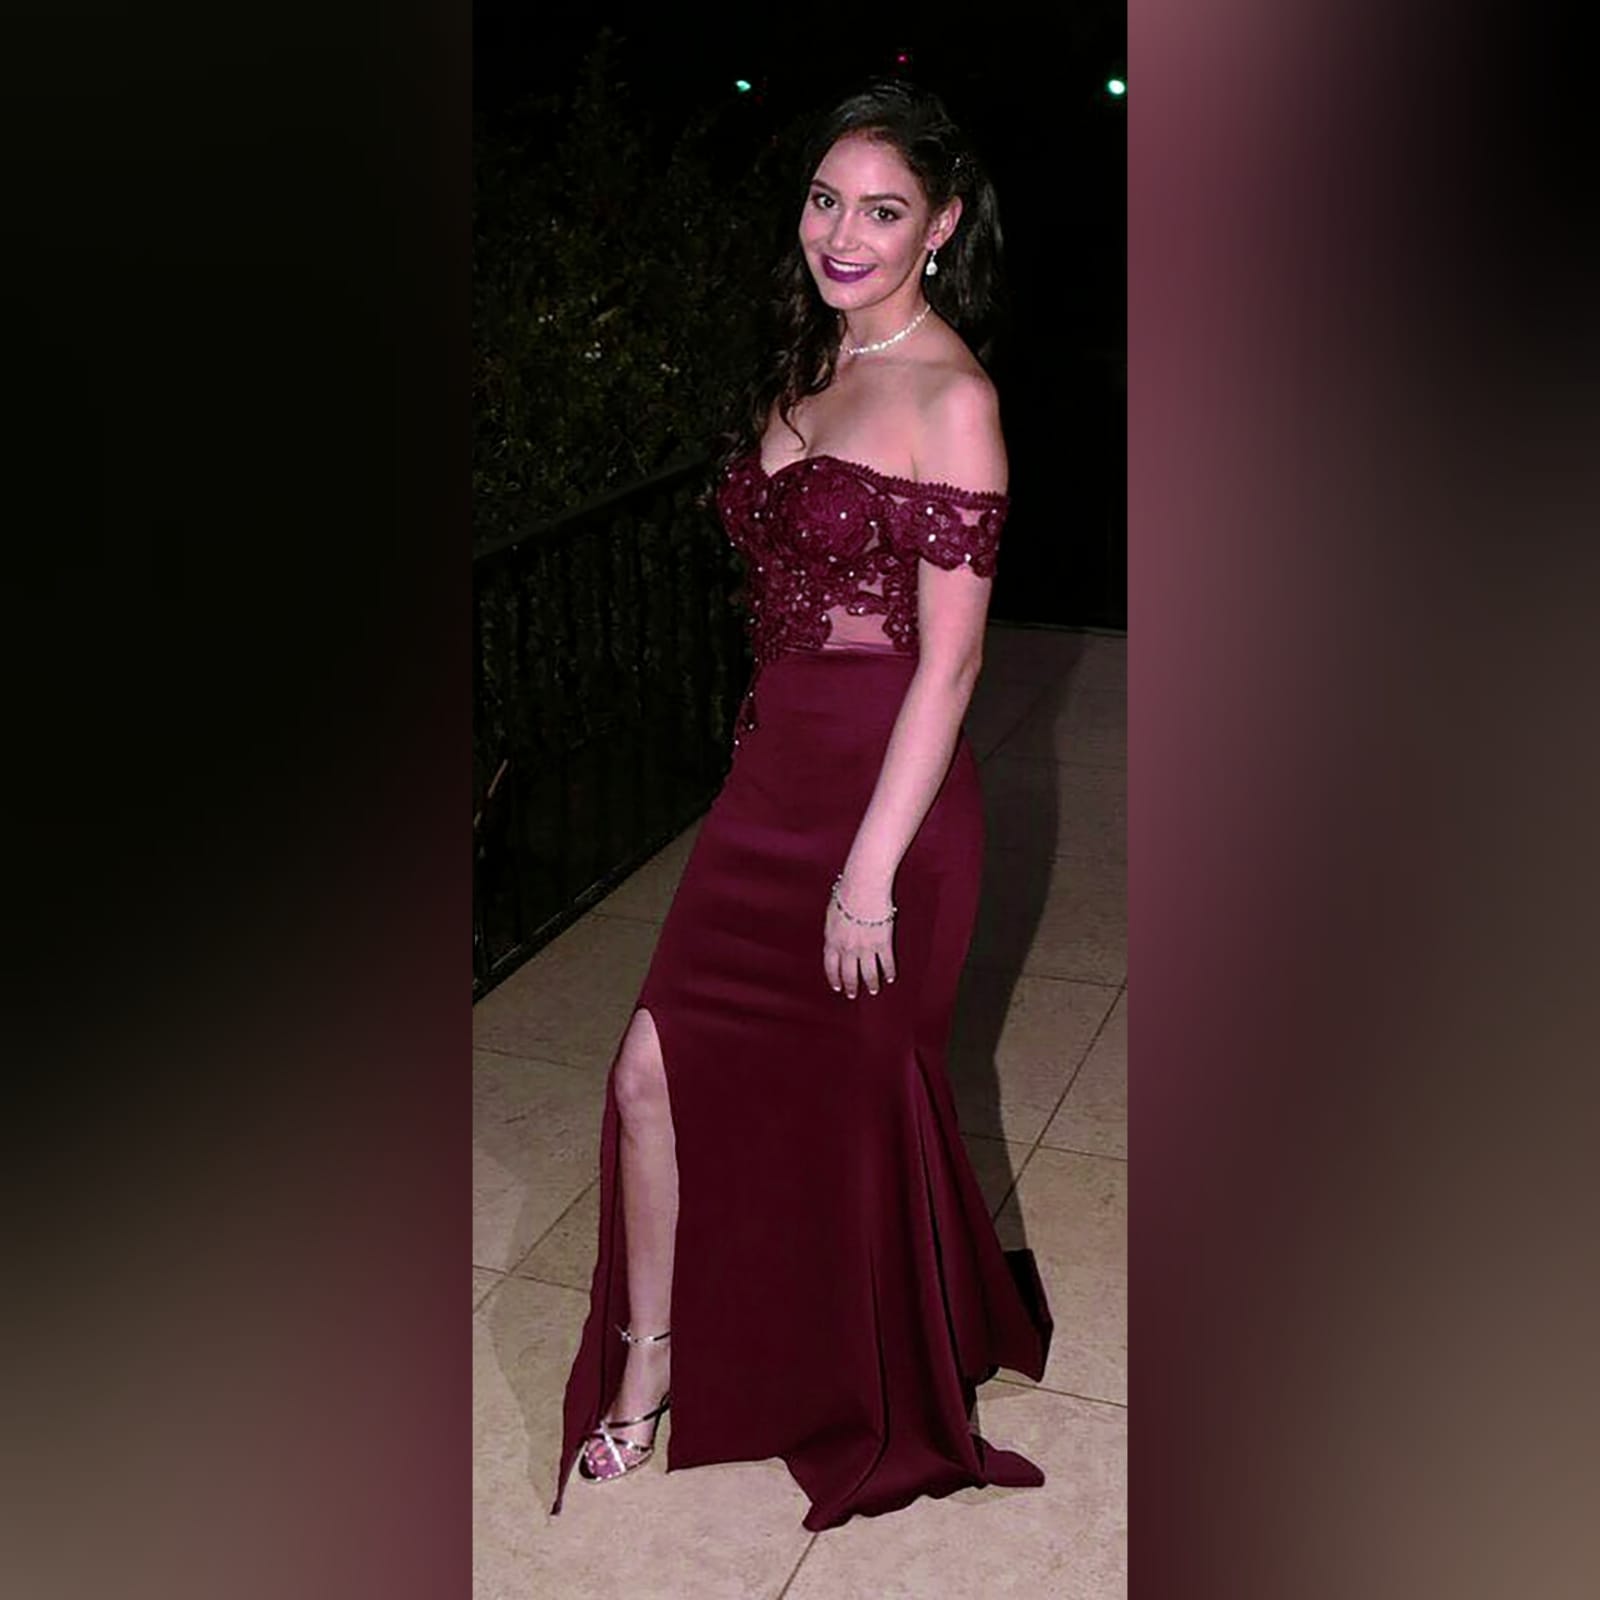 Burgundy off shoulder long matric dance dress 1 burgundy off shoulder long matric dance dress. With an illusion bodice detailed with lace and beads and off-shoulder short sleeves. Bottom fitted till hip, with a high slit and a train for a touch of sexy and drama.